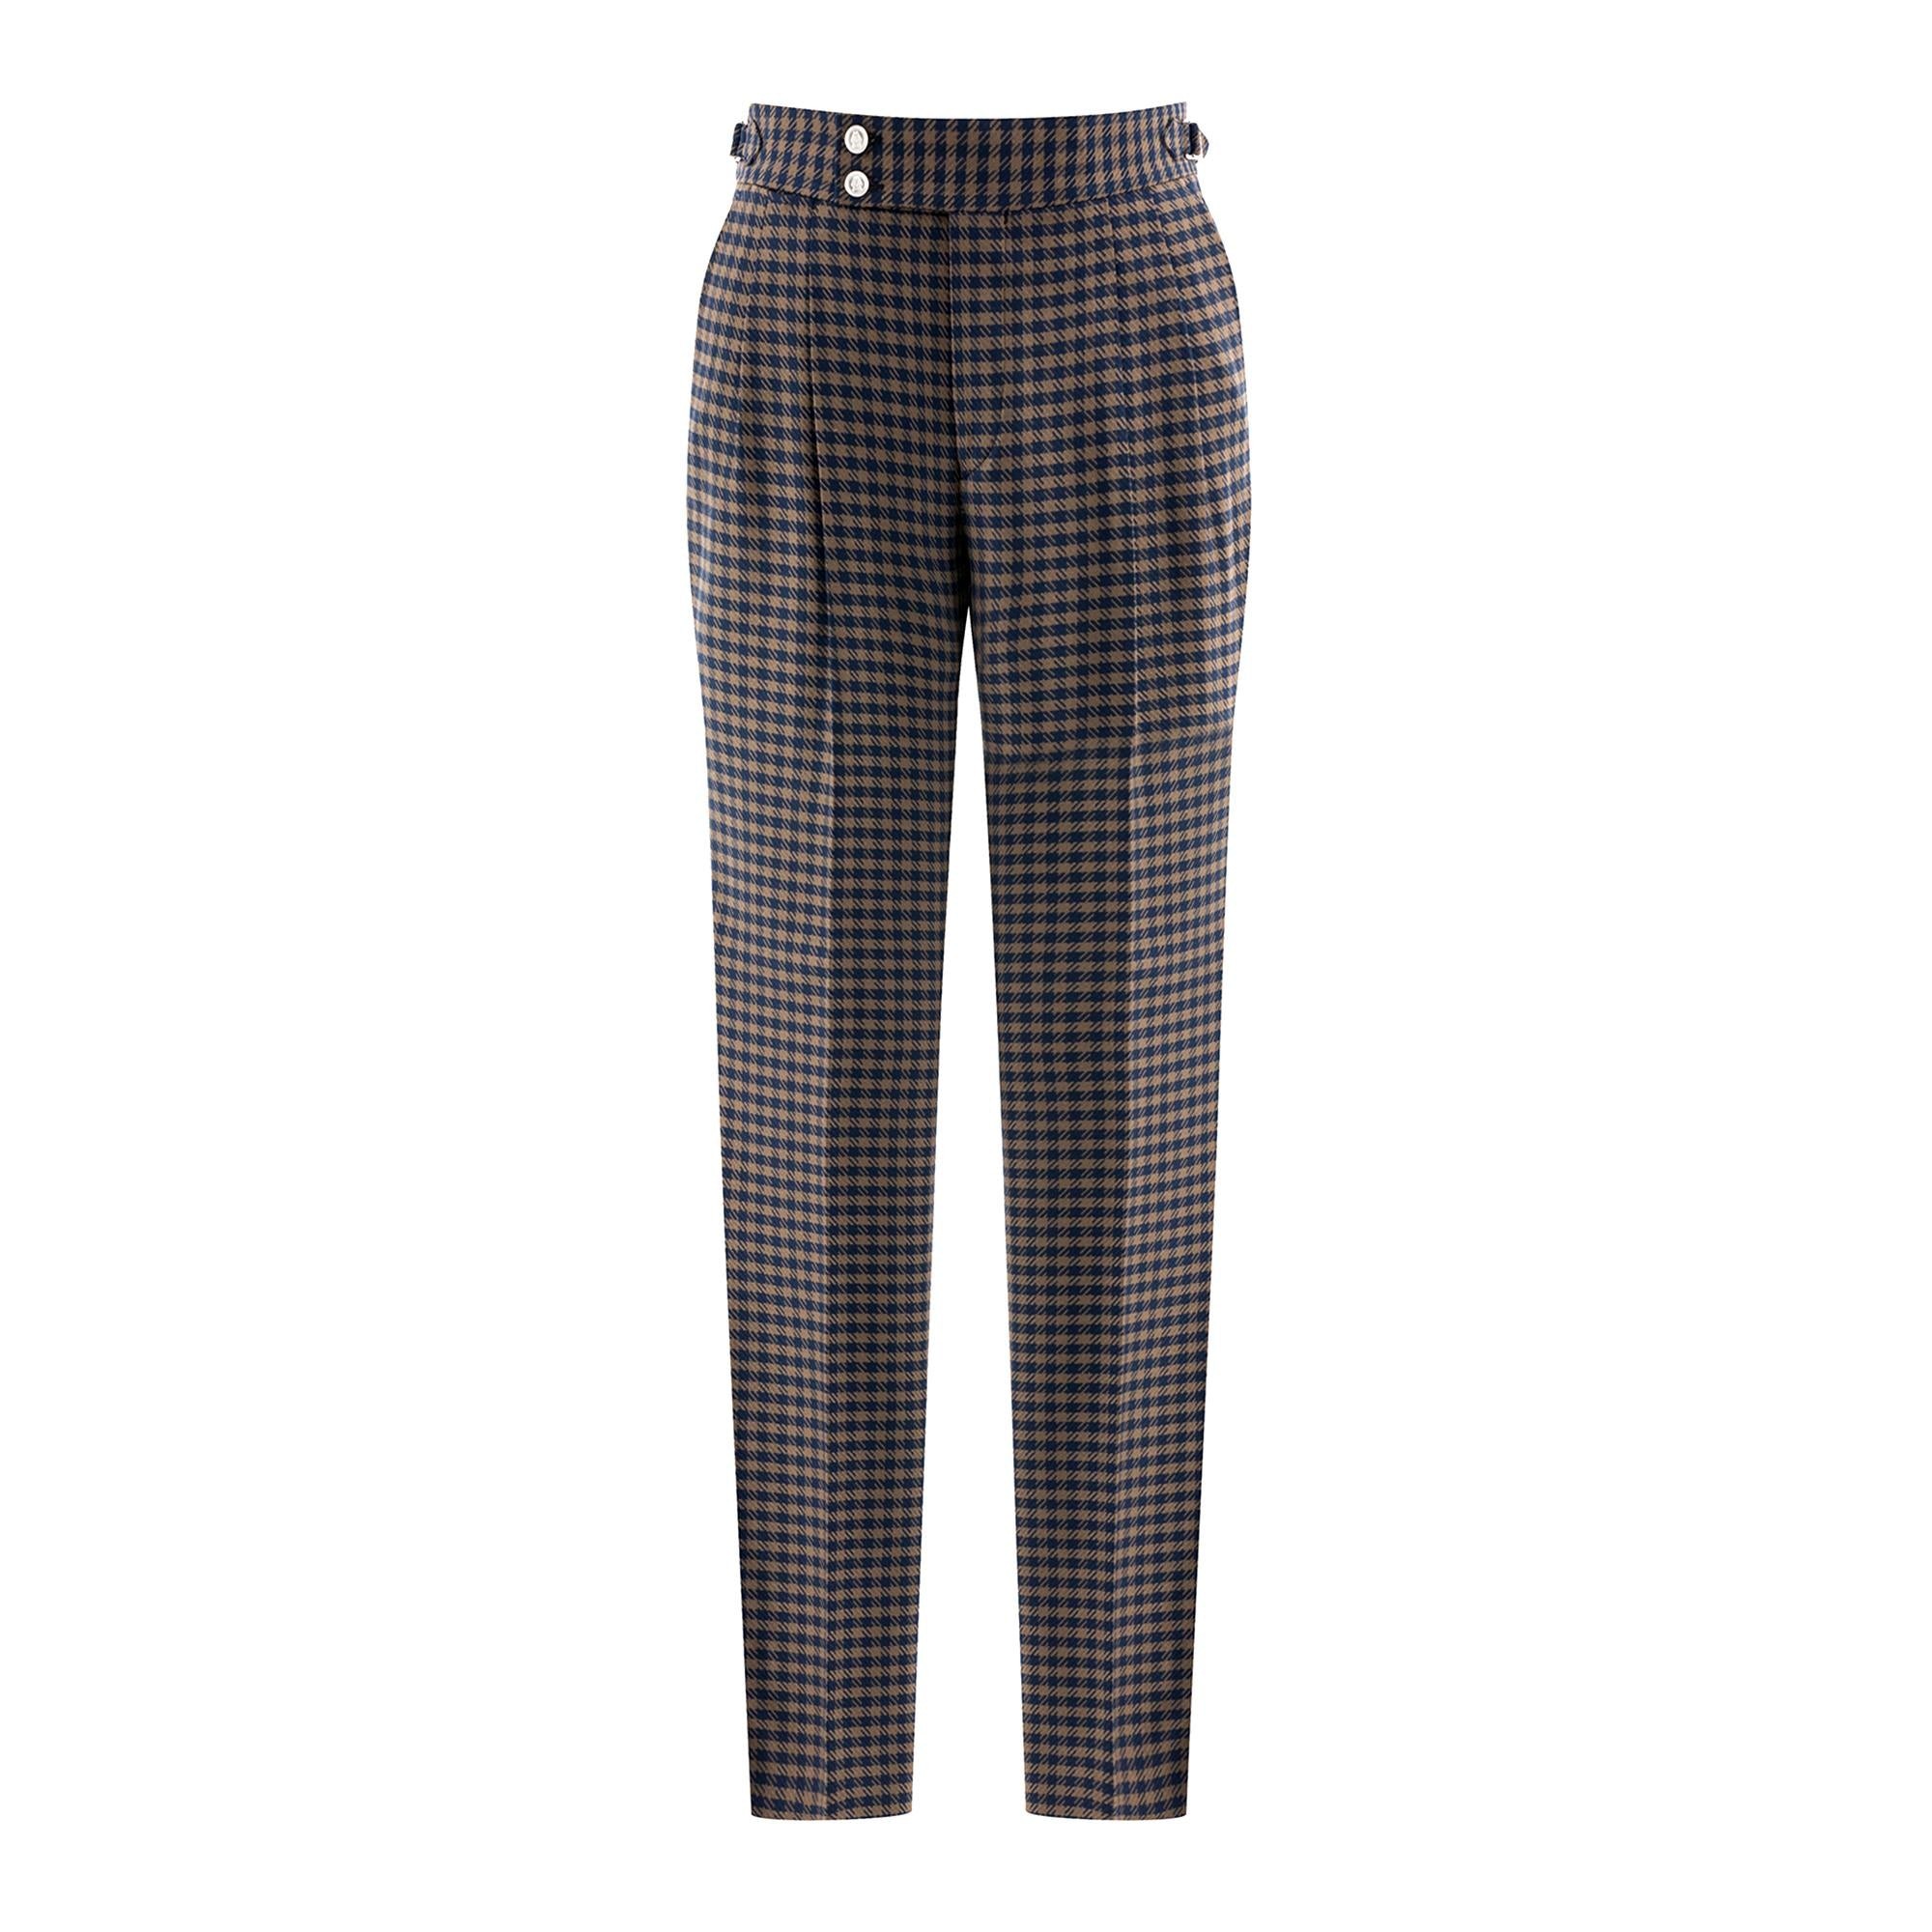 BROWN/NAVY BLUE CHECKERED TROUSERS